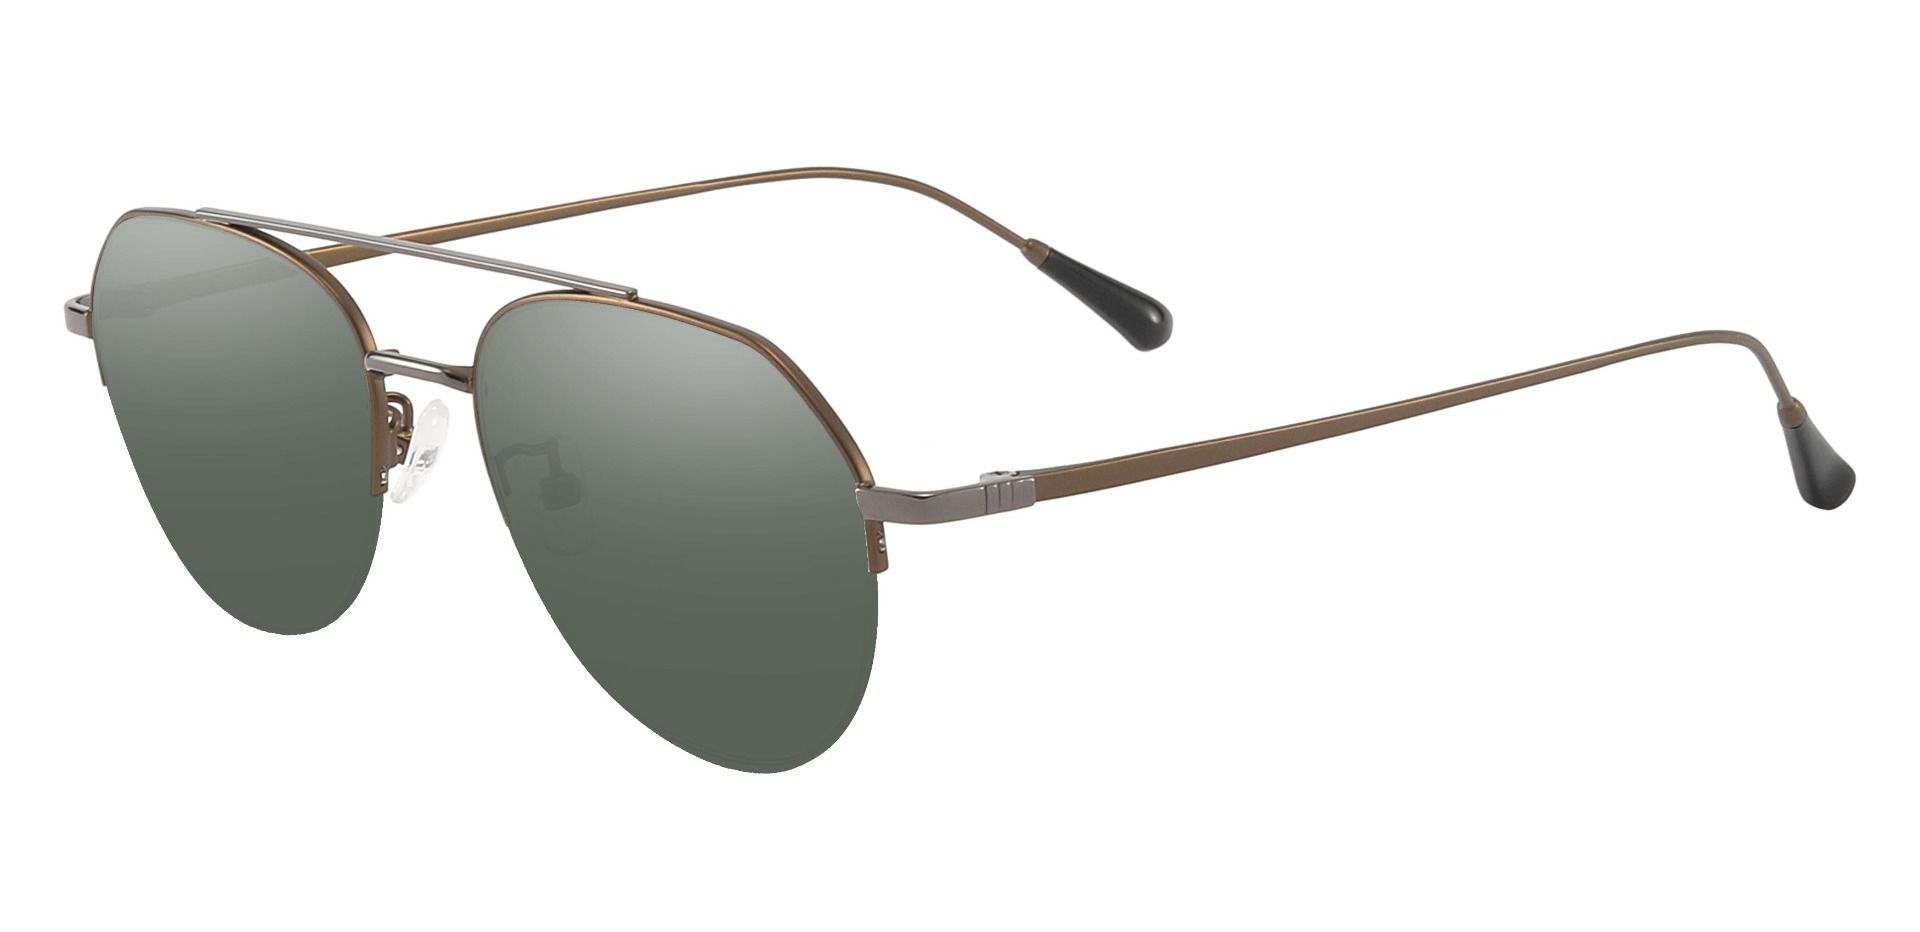 Waldorf Aviator Non-Rx Sunglasses - Brown Frame With Green Lenses